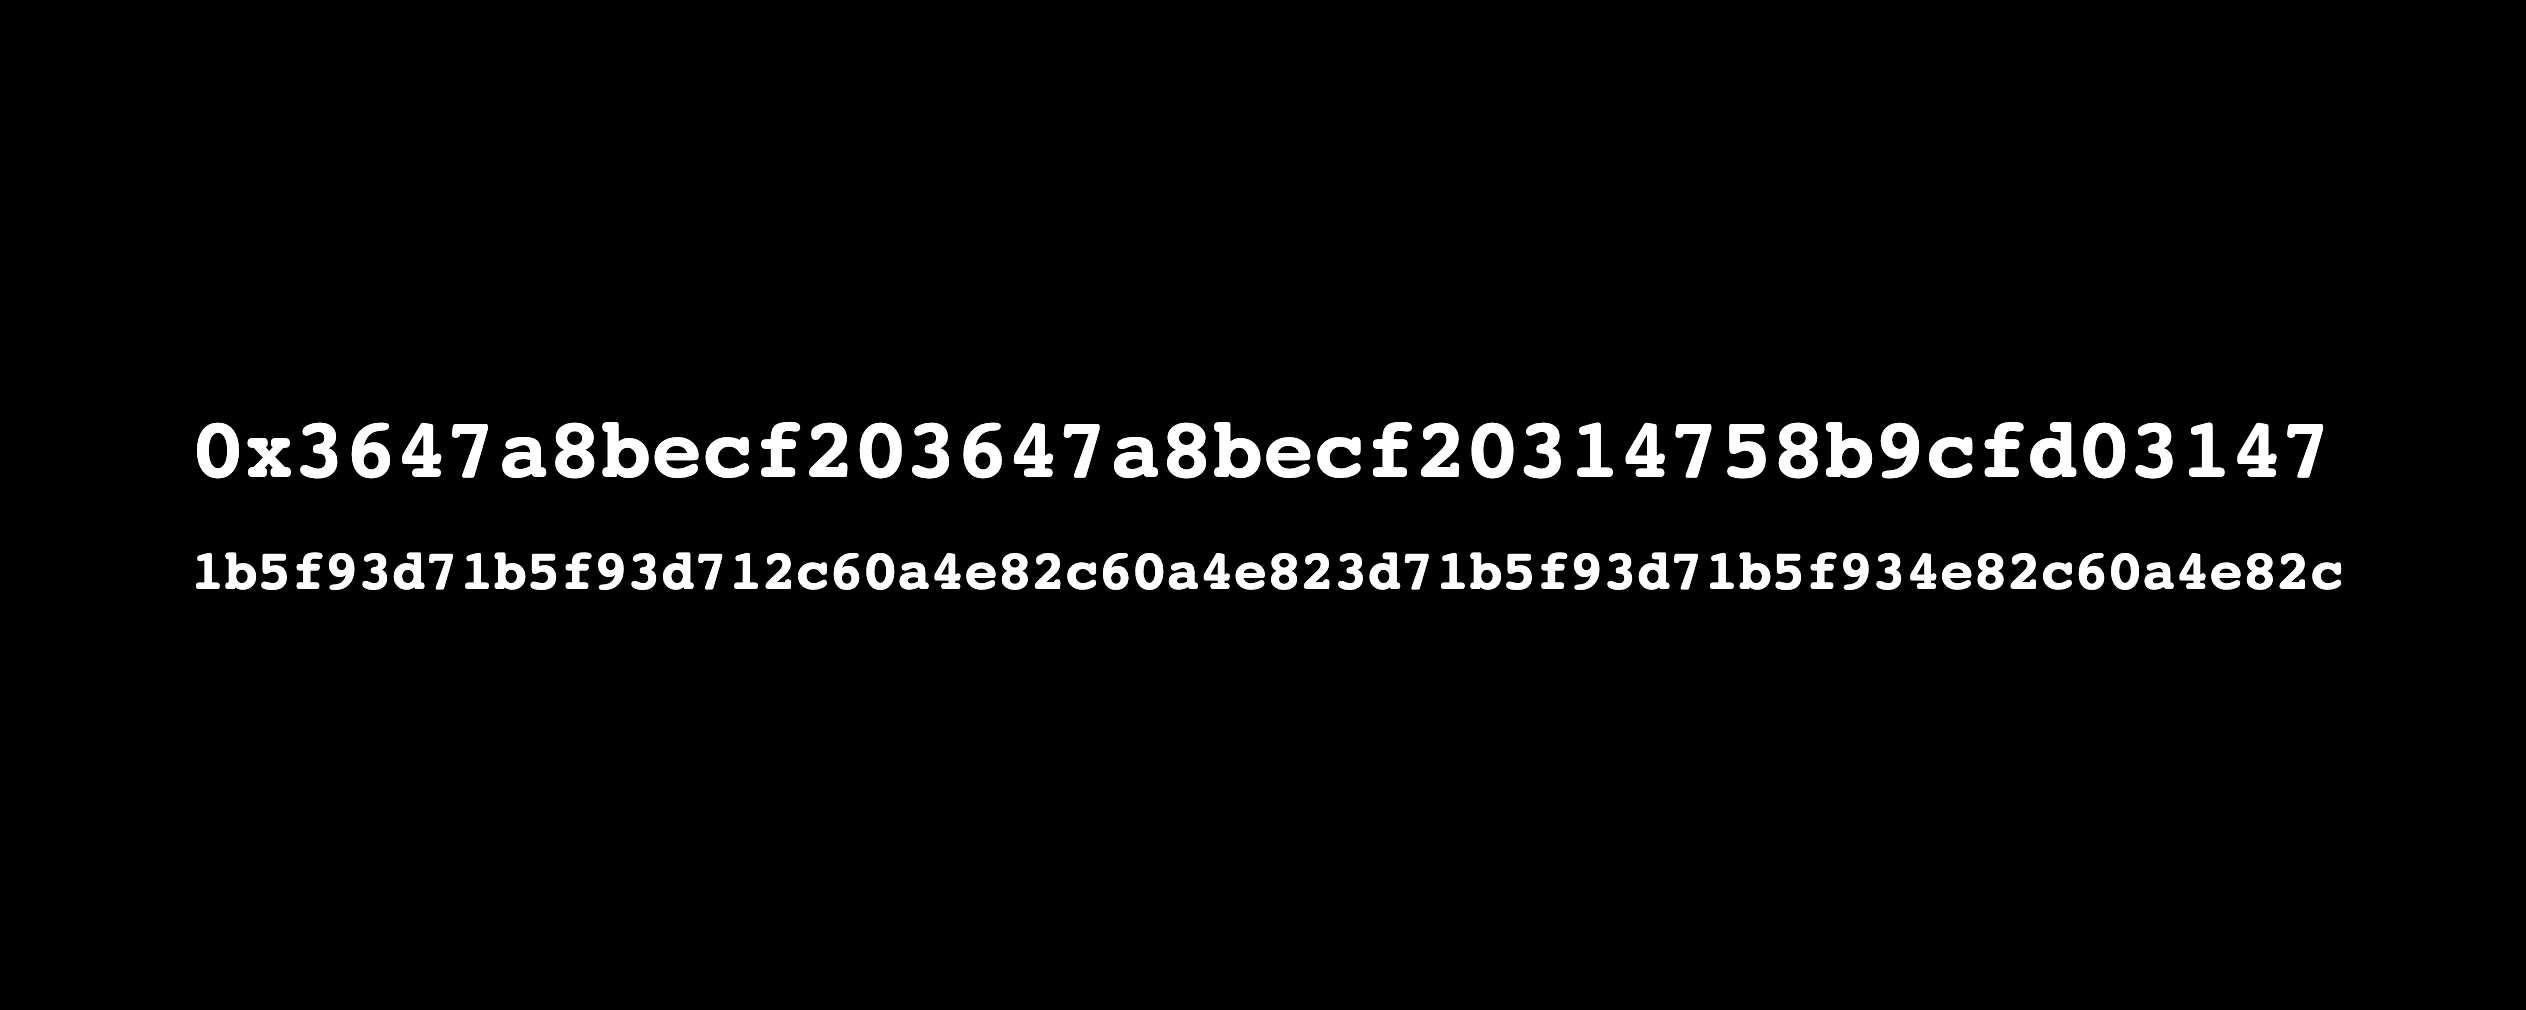 Two lines of randomized, white, hexadecimal characters centered on a black background. The first line is 40 characters long and reads: 0x3647a8becf203647a8becf2031475869cfd03147. The second line is 64 characters long and reads: 165£93d7165193d712c60a4e82c60a4e823d7165£93d71651934e82c60a4e82c